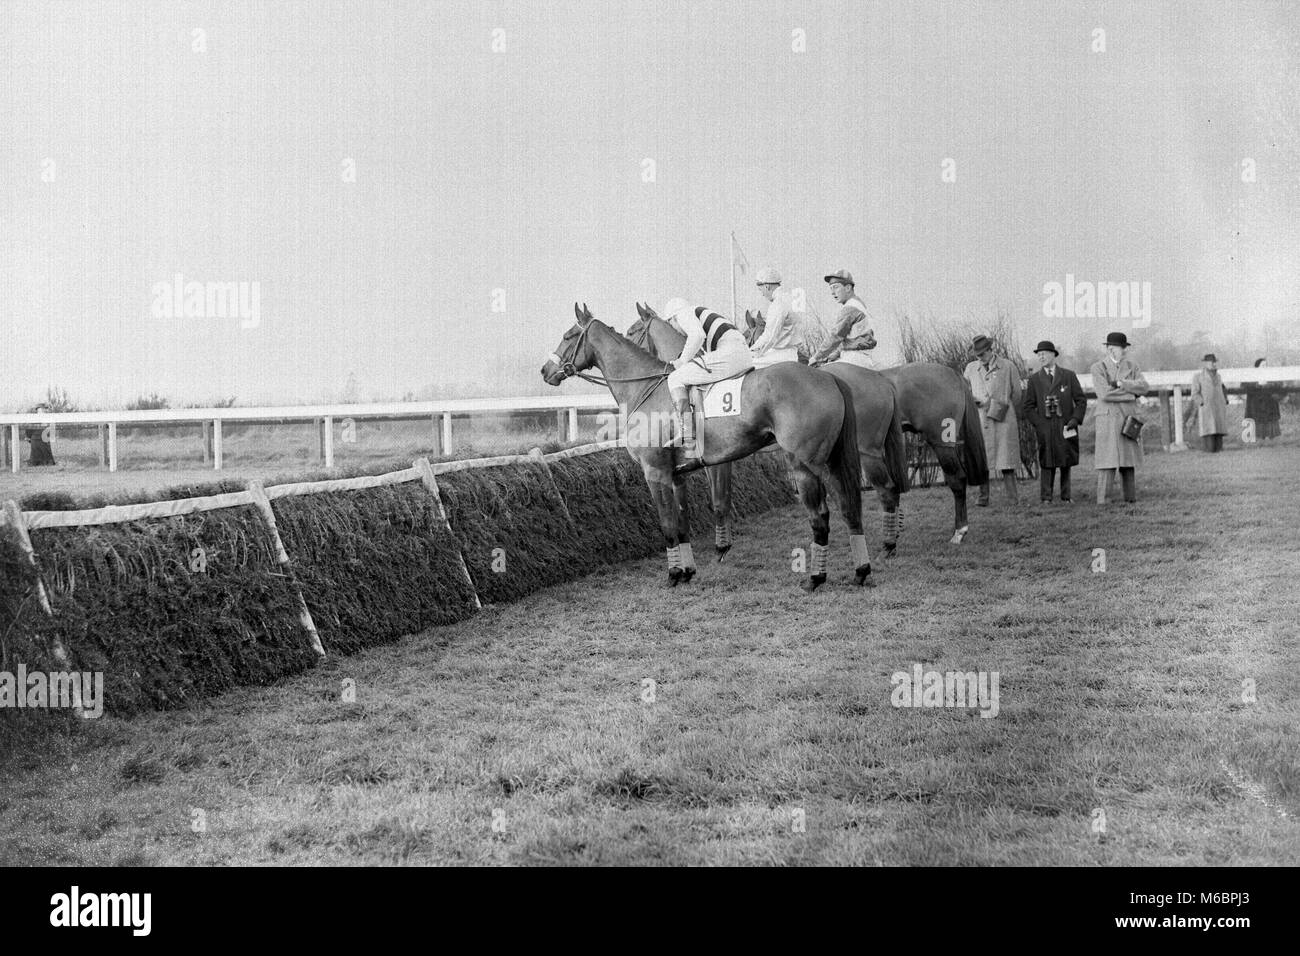 Some of the runners in the December Juvenile Hurdle Race at Sandown Park take a look at the new rubber-padded hurdles. Major Gerald Glover's Harry Way (no 9), Michael Scudamore up, is nearest camera. The padded hurdles are being given their first try-out on a southern racecourse. Stock Photo